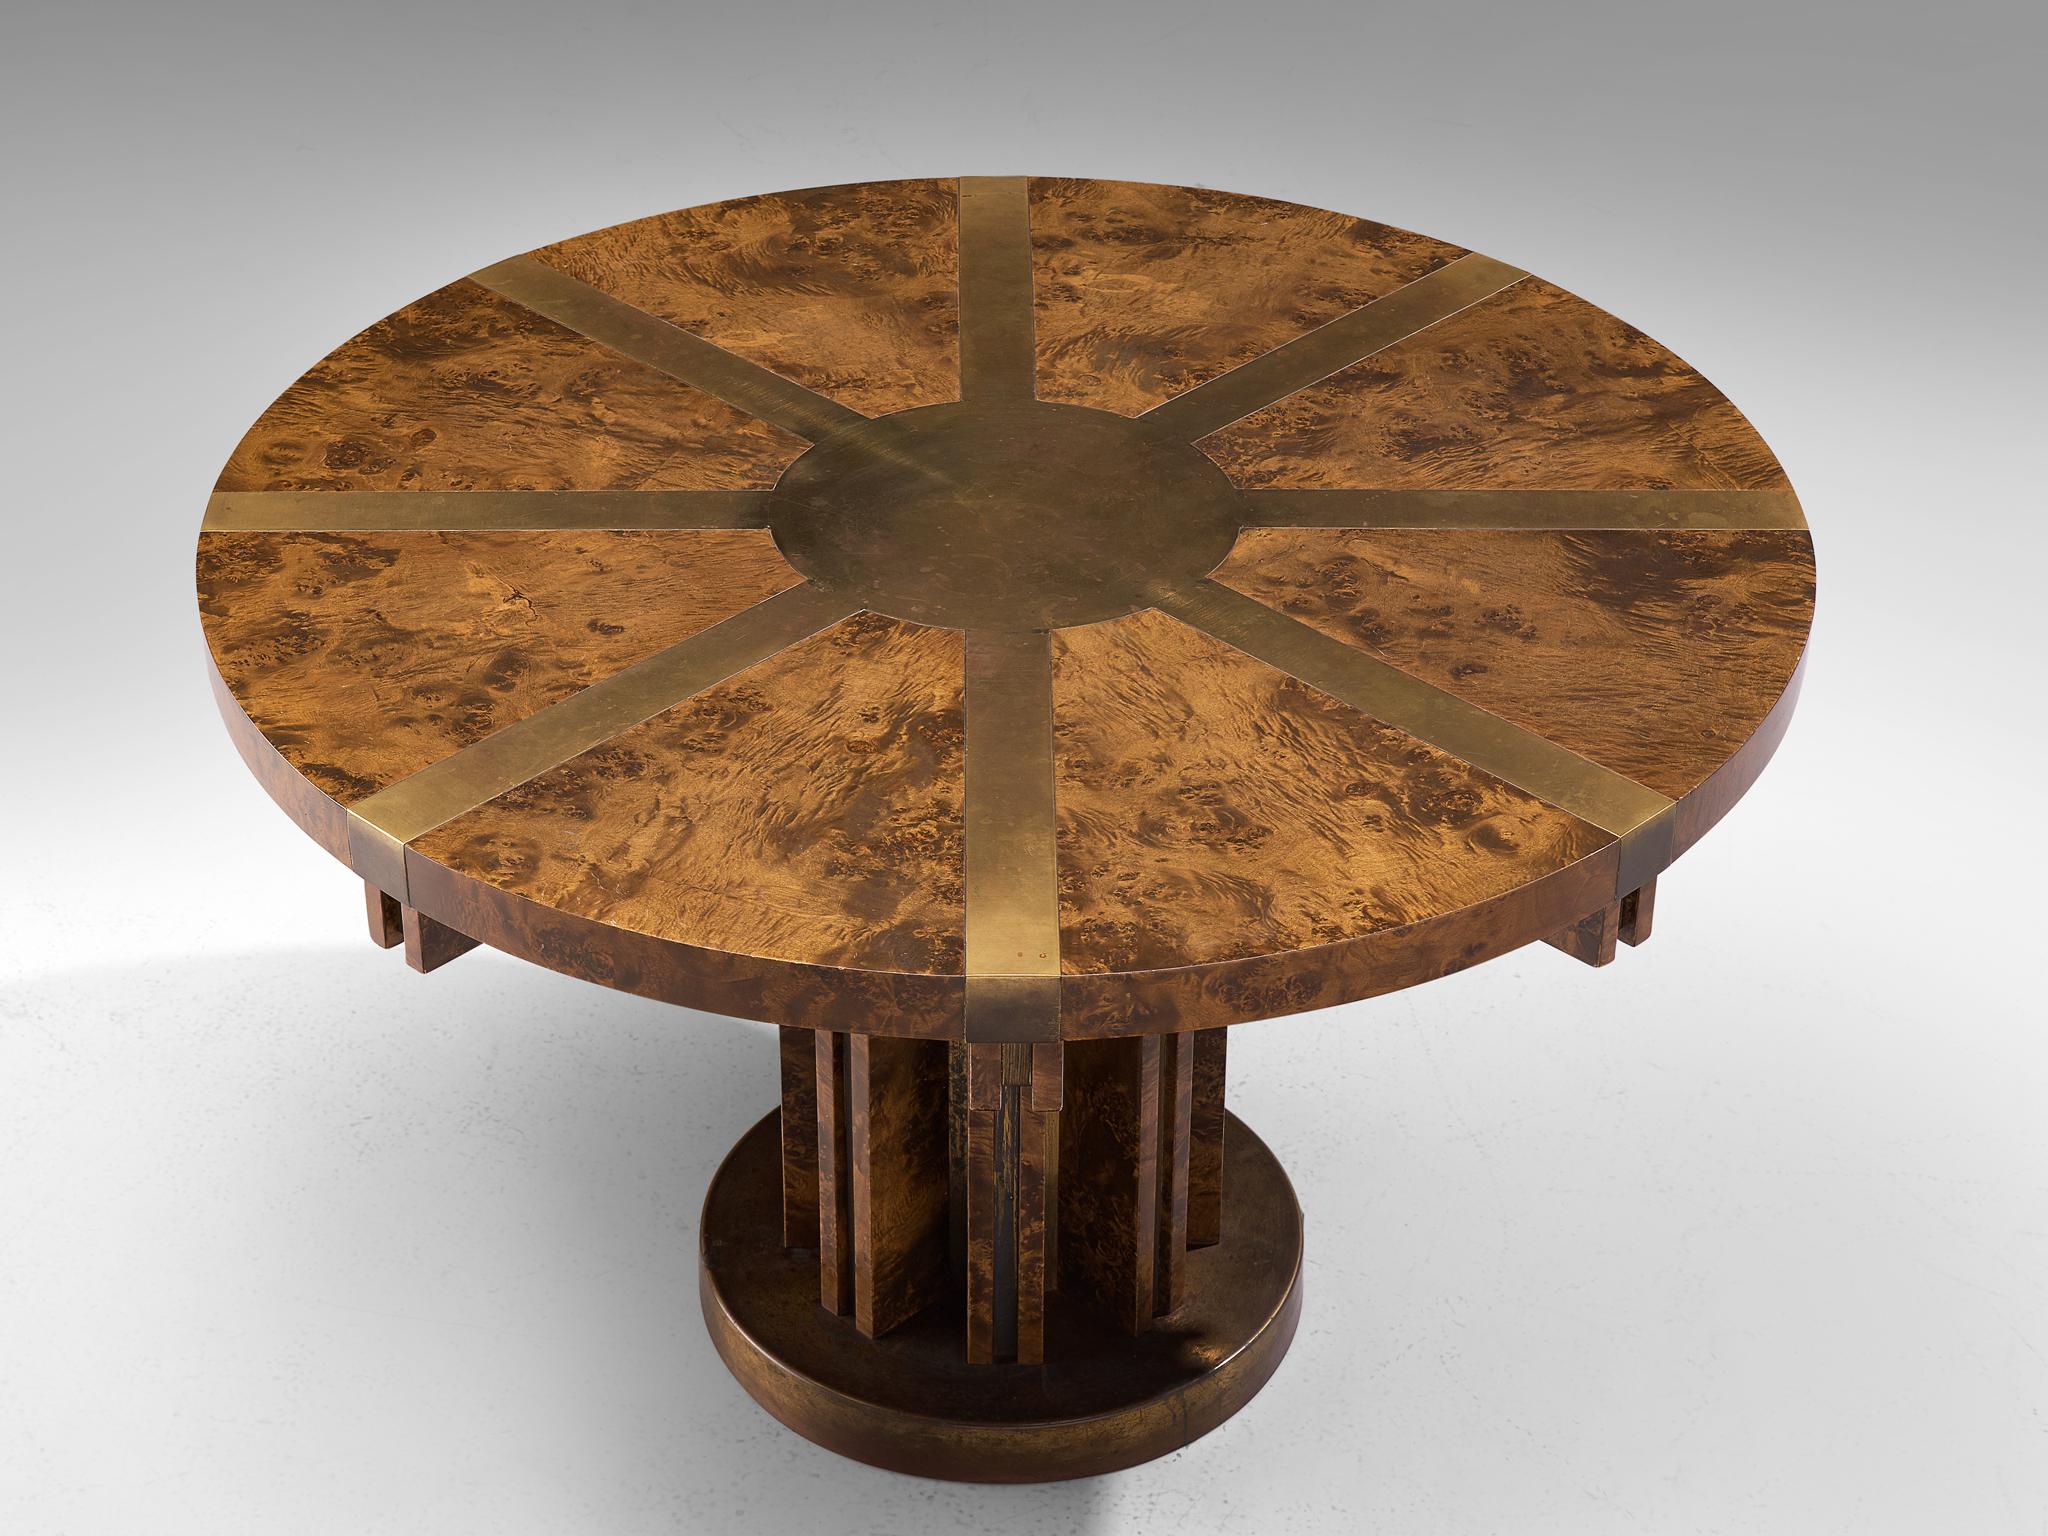 Italian Brutalist Pedestal Table in Burl Wood and Brass, Italy, 1950s